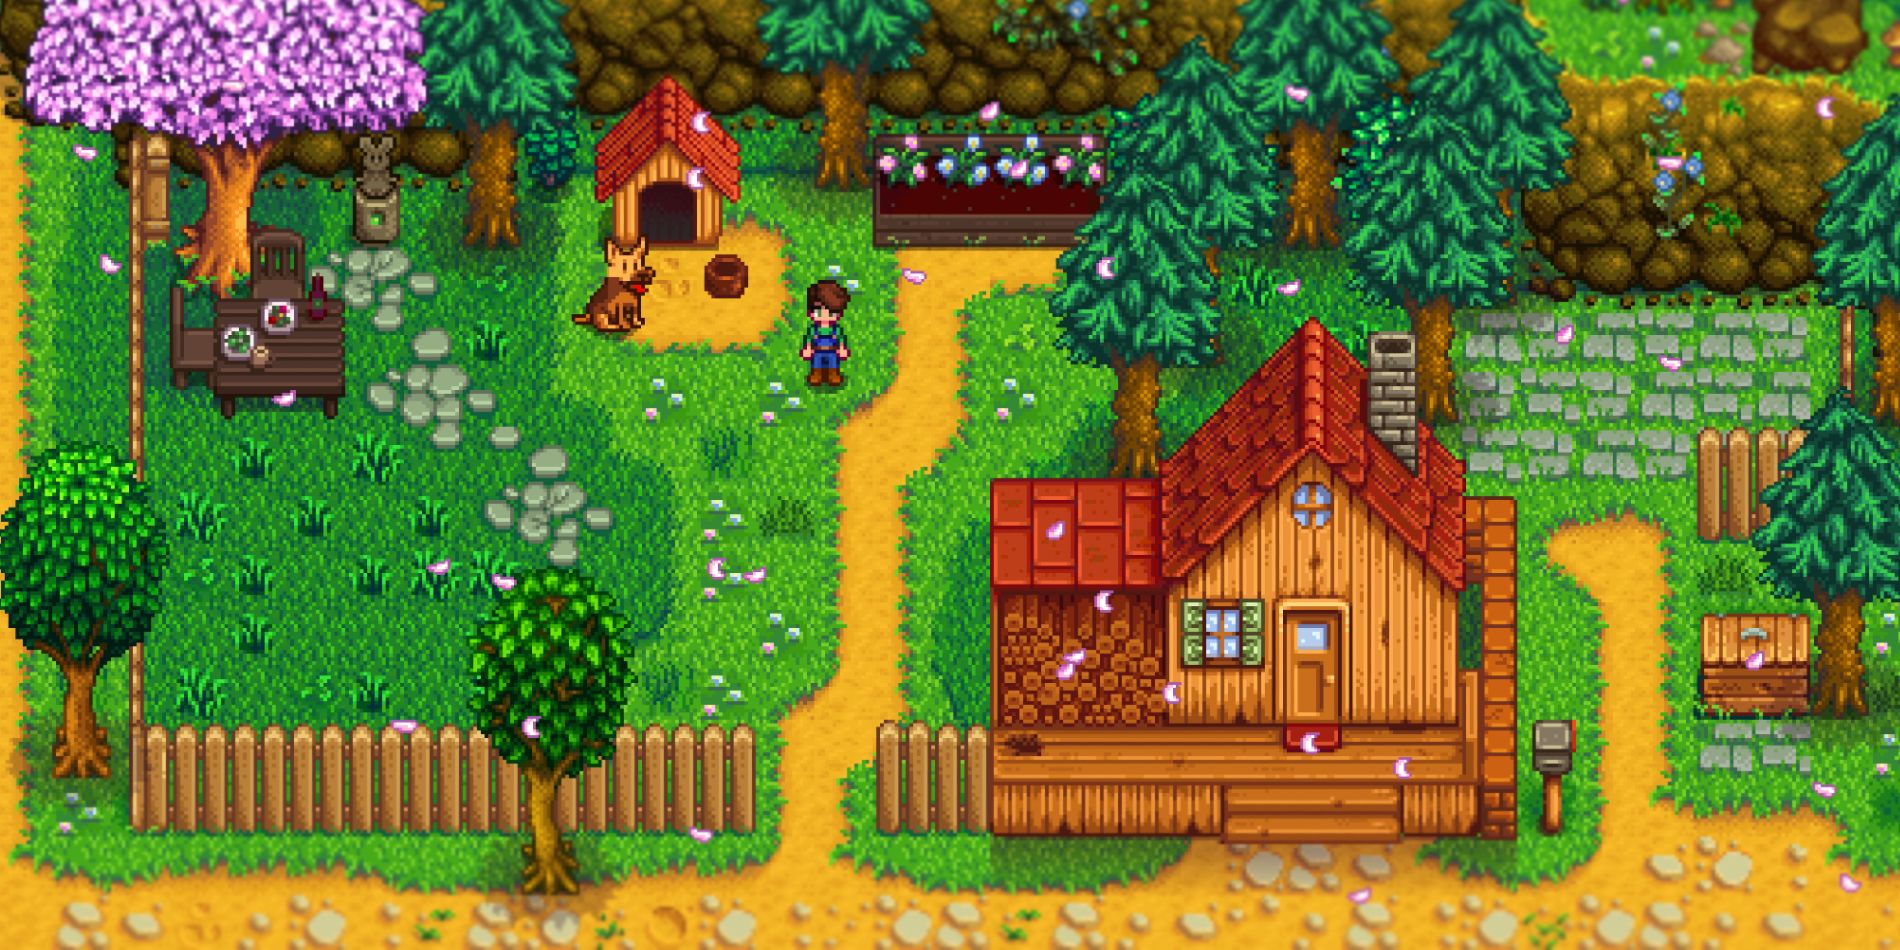 Aesthetic Stardew Valley Farm Design - Home Collection